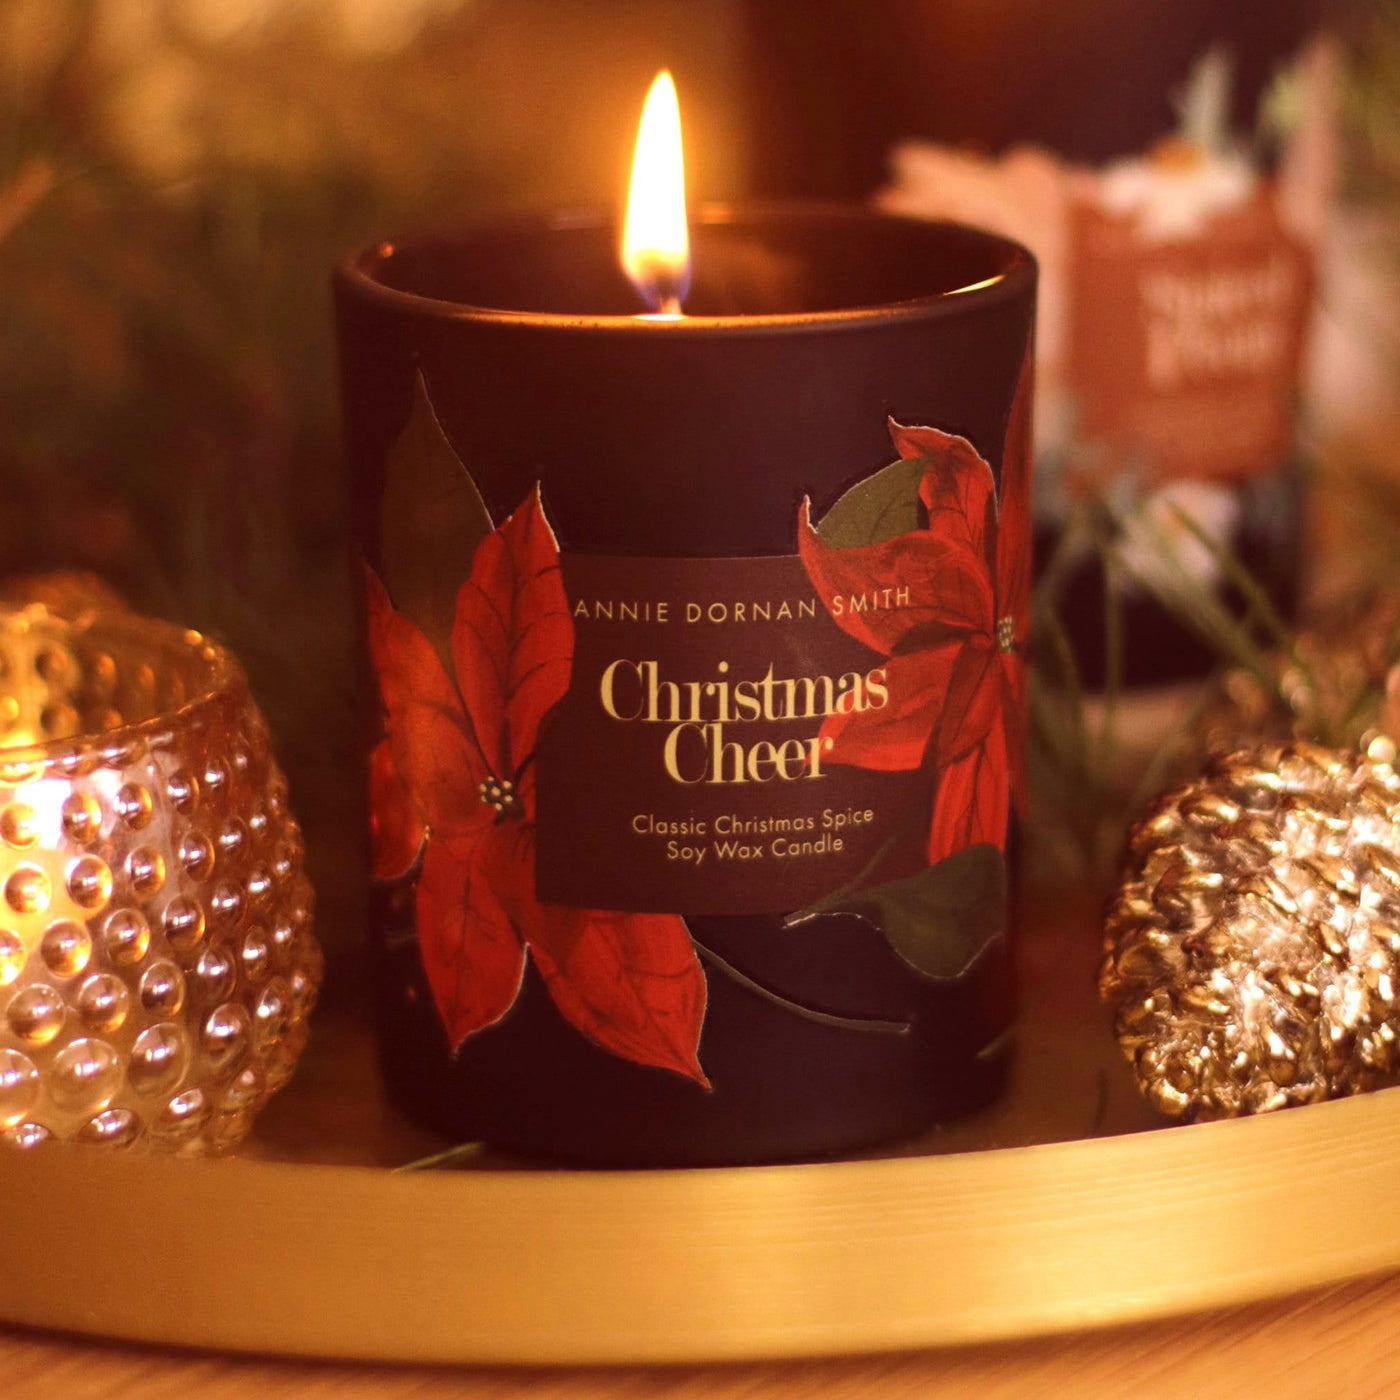 A Black Glass Candle Decorated with Red Poinsettias And A Christmas Cheer Label - Annie Dornan Smith